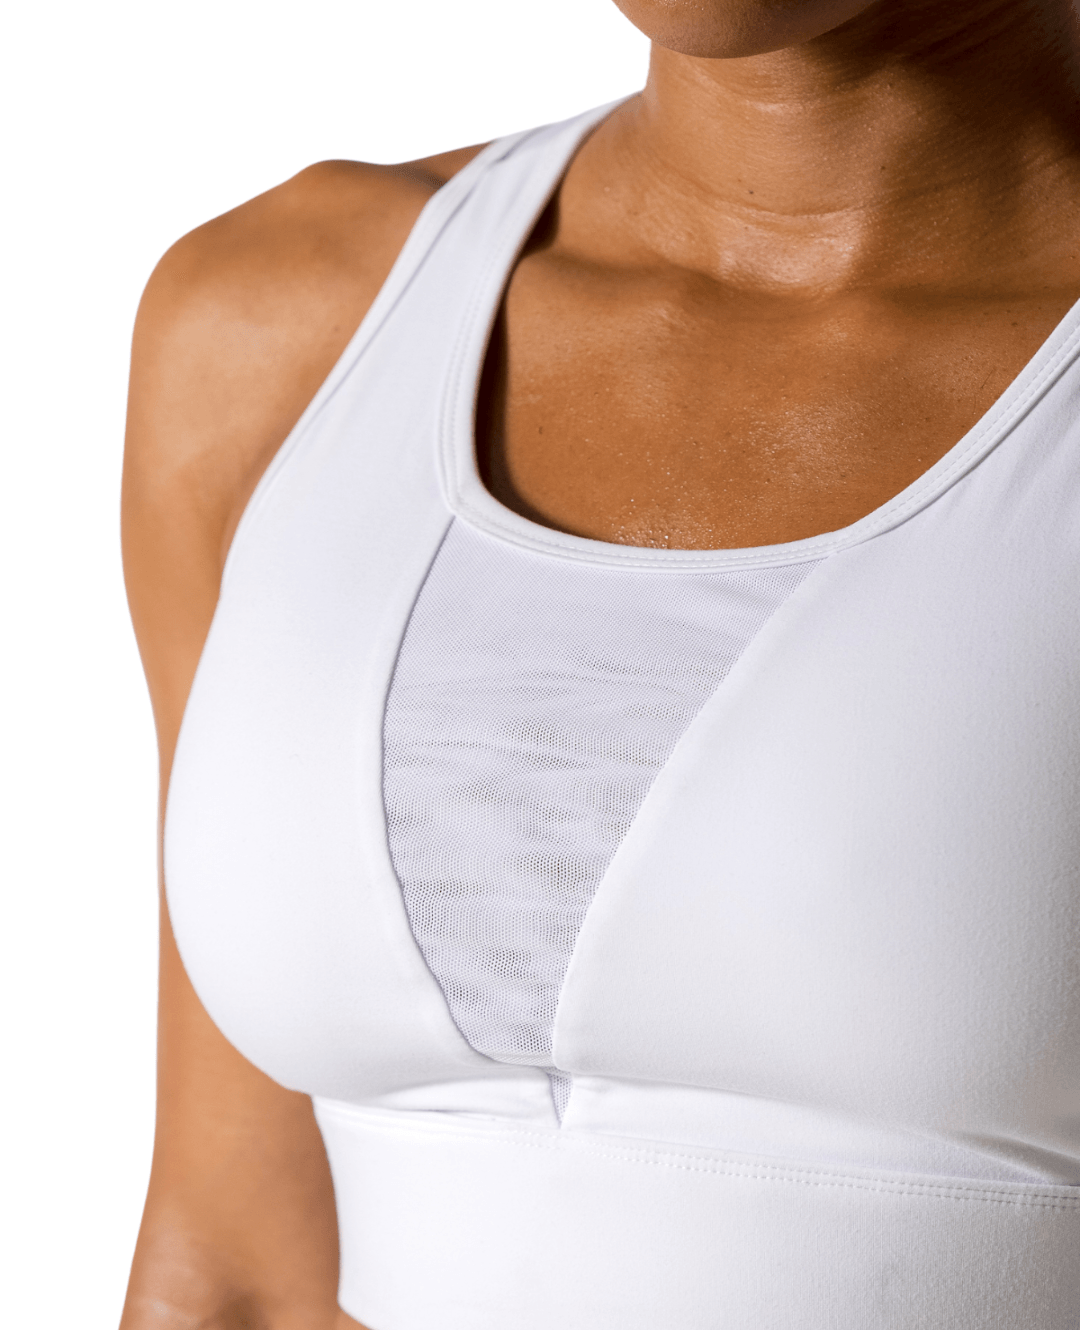 Womens Yoga Plain Black Sports Bra Shockproof Crop Top For Running,  Fitness, And Quick Dry Wear Solid Color S XXL Sizes Available From  Dianweiliu, $13.27